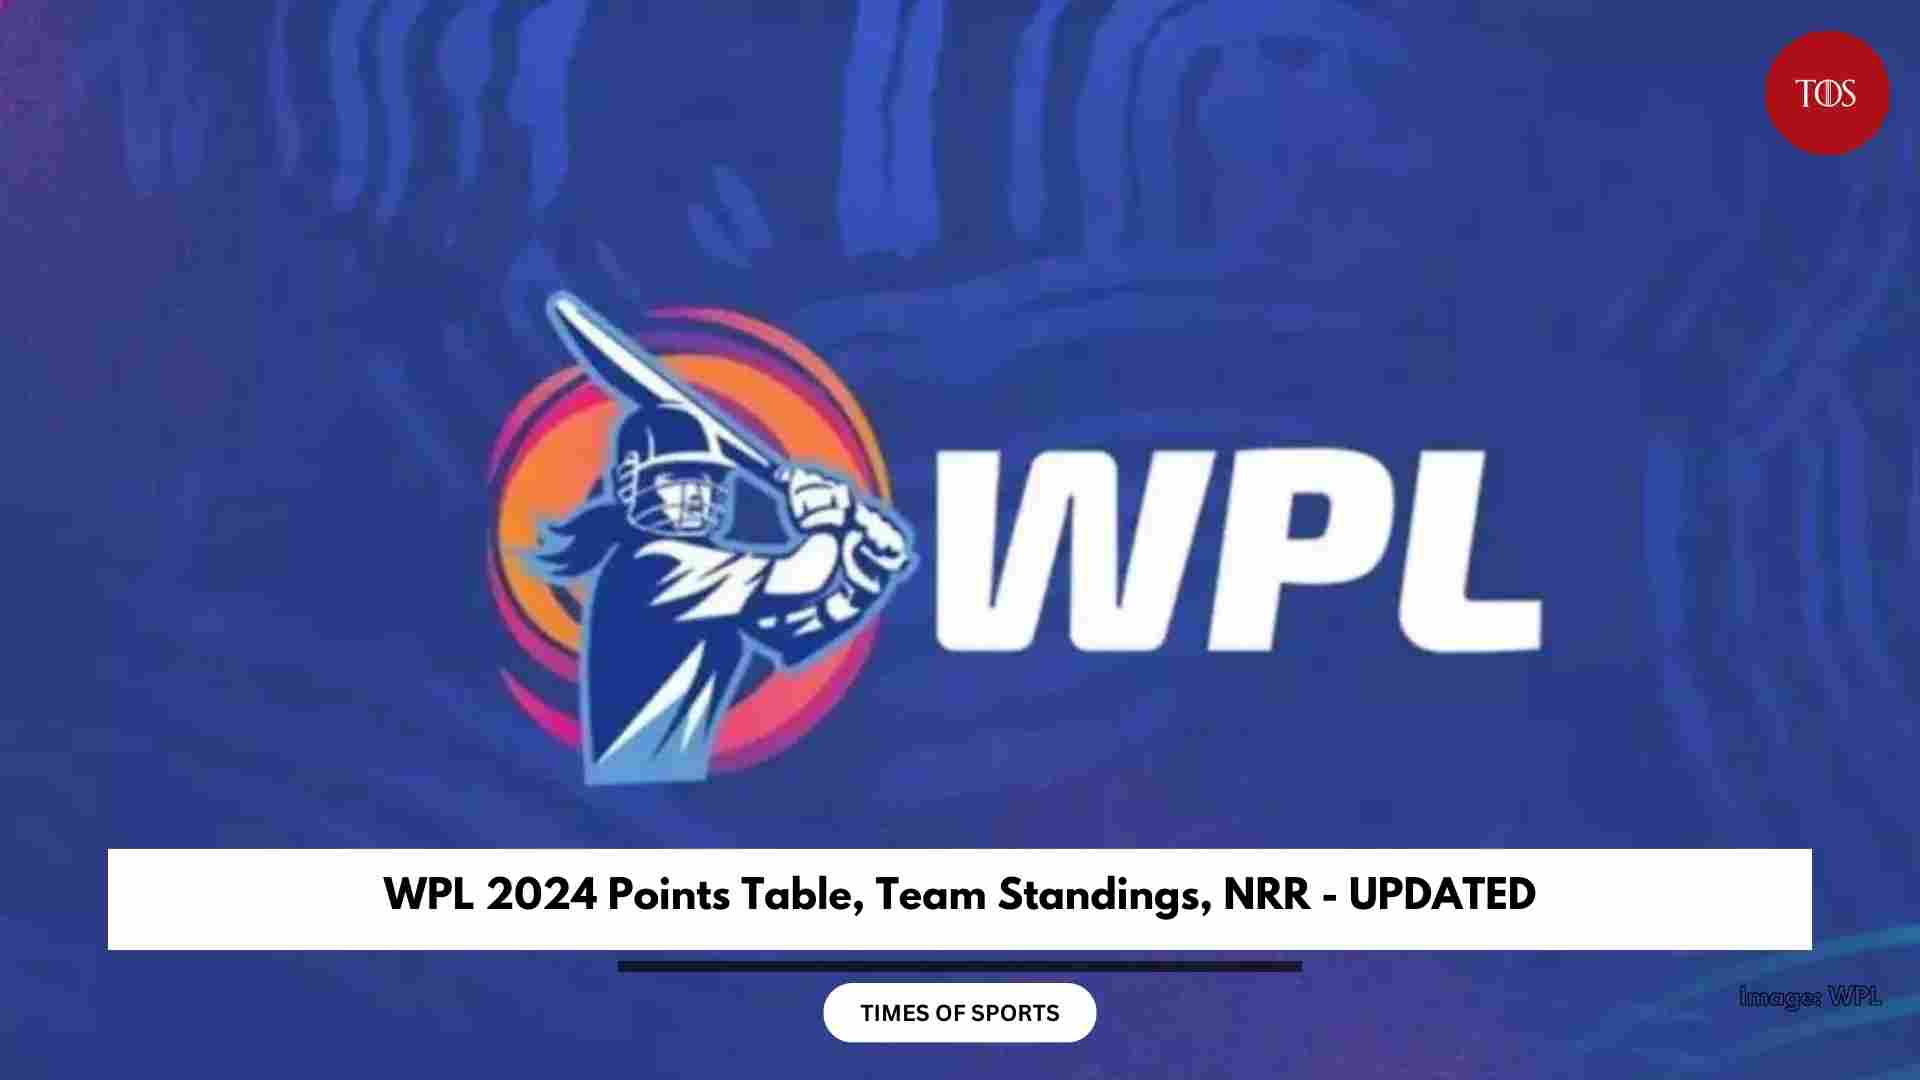 WPL 2024 Points Table, Team Standings, NRR UPDATED